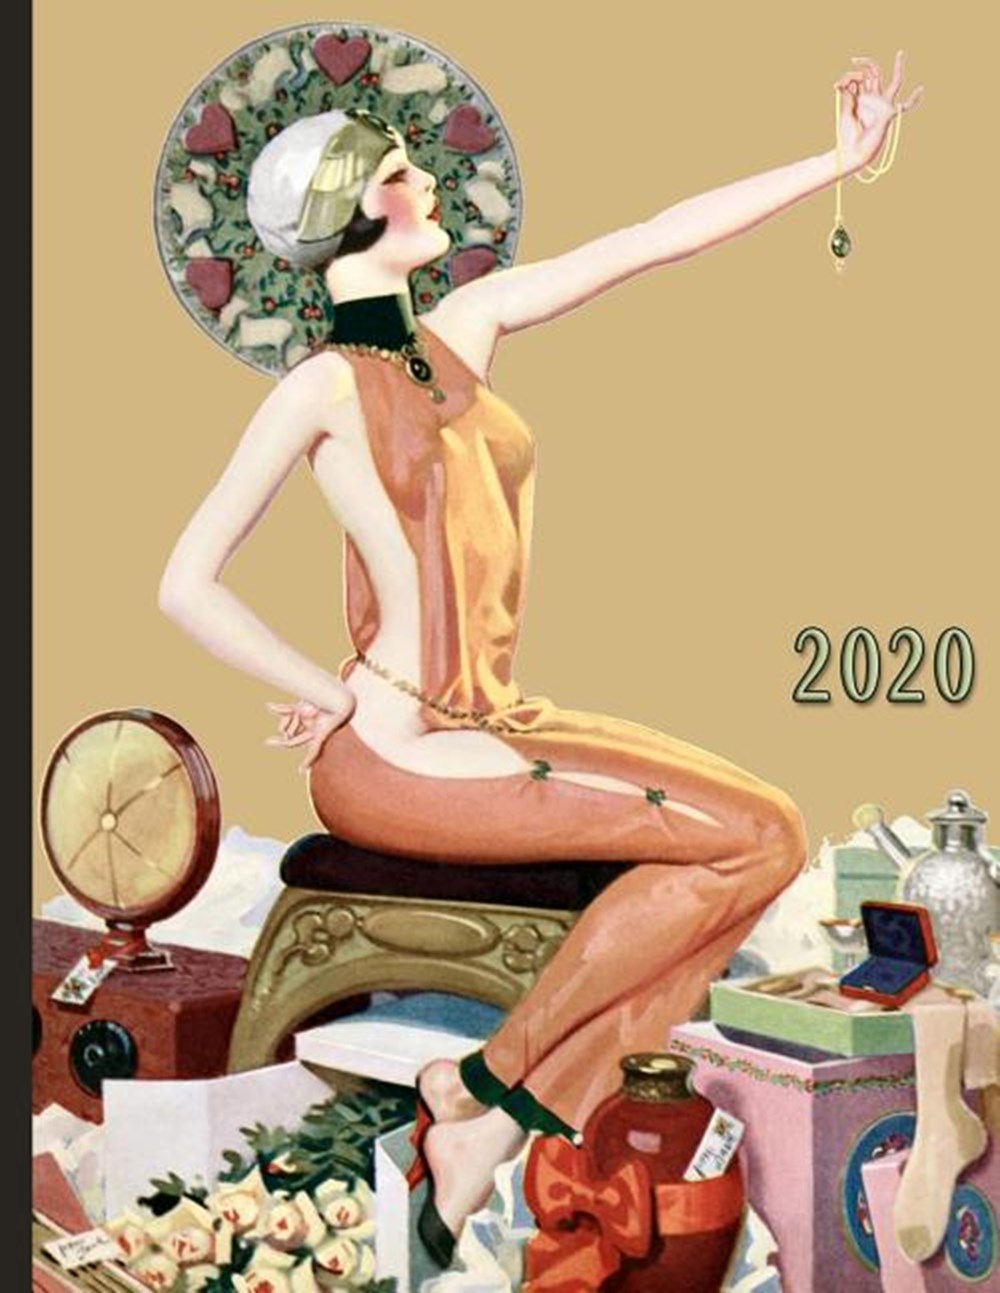 Vintage Pinup Girl with Flowers Jewelry and Gifts 2020 Schedule Planner and Organizer / Weekly Calen